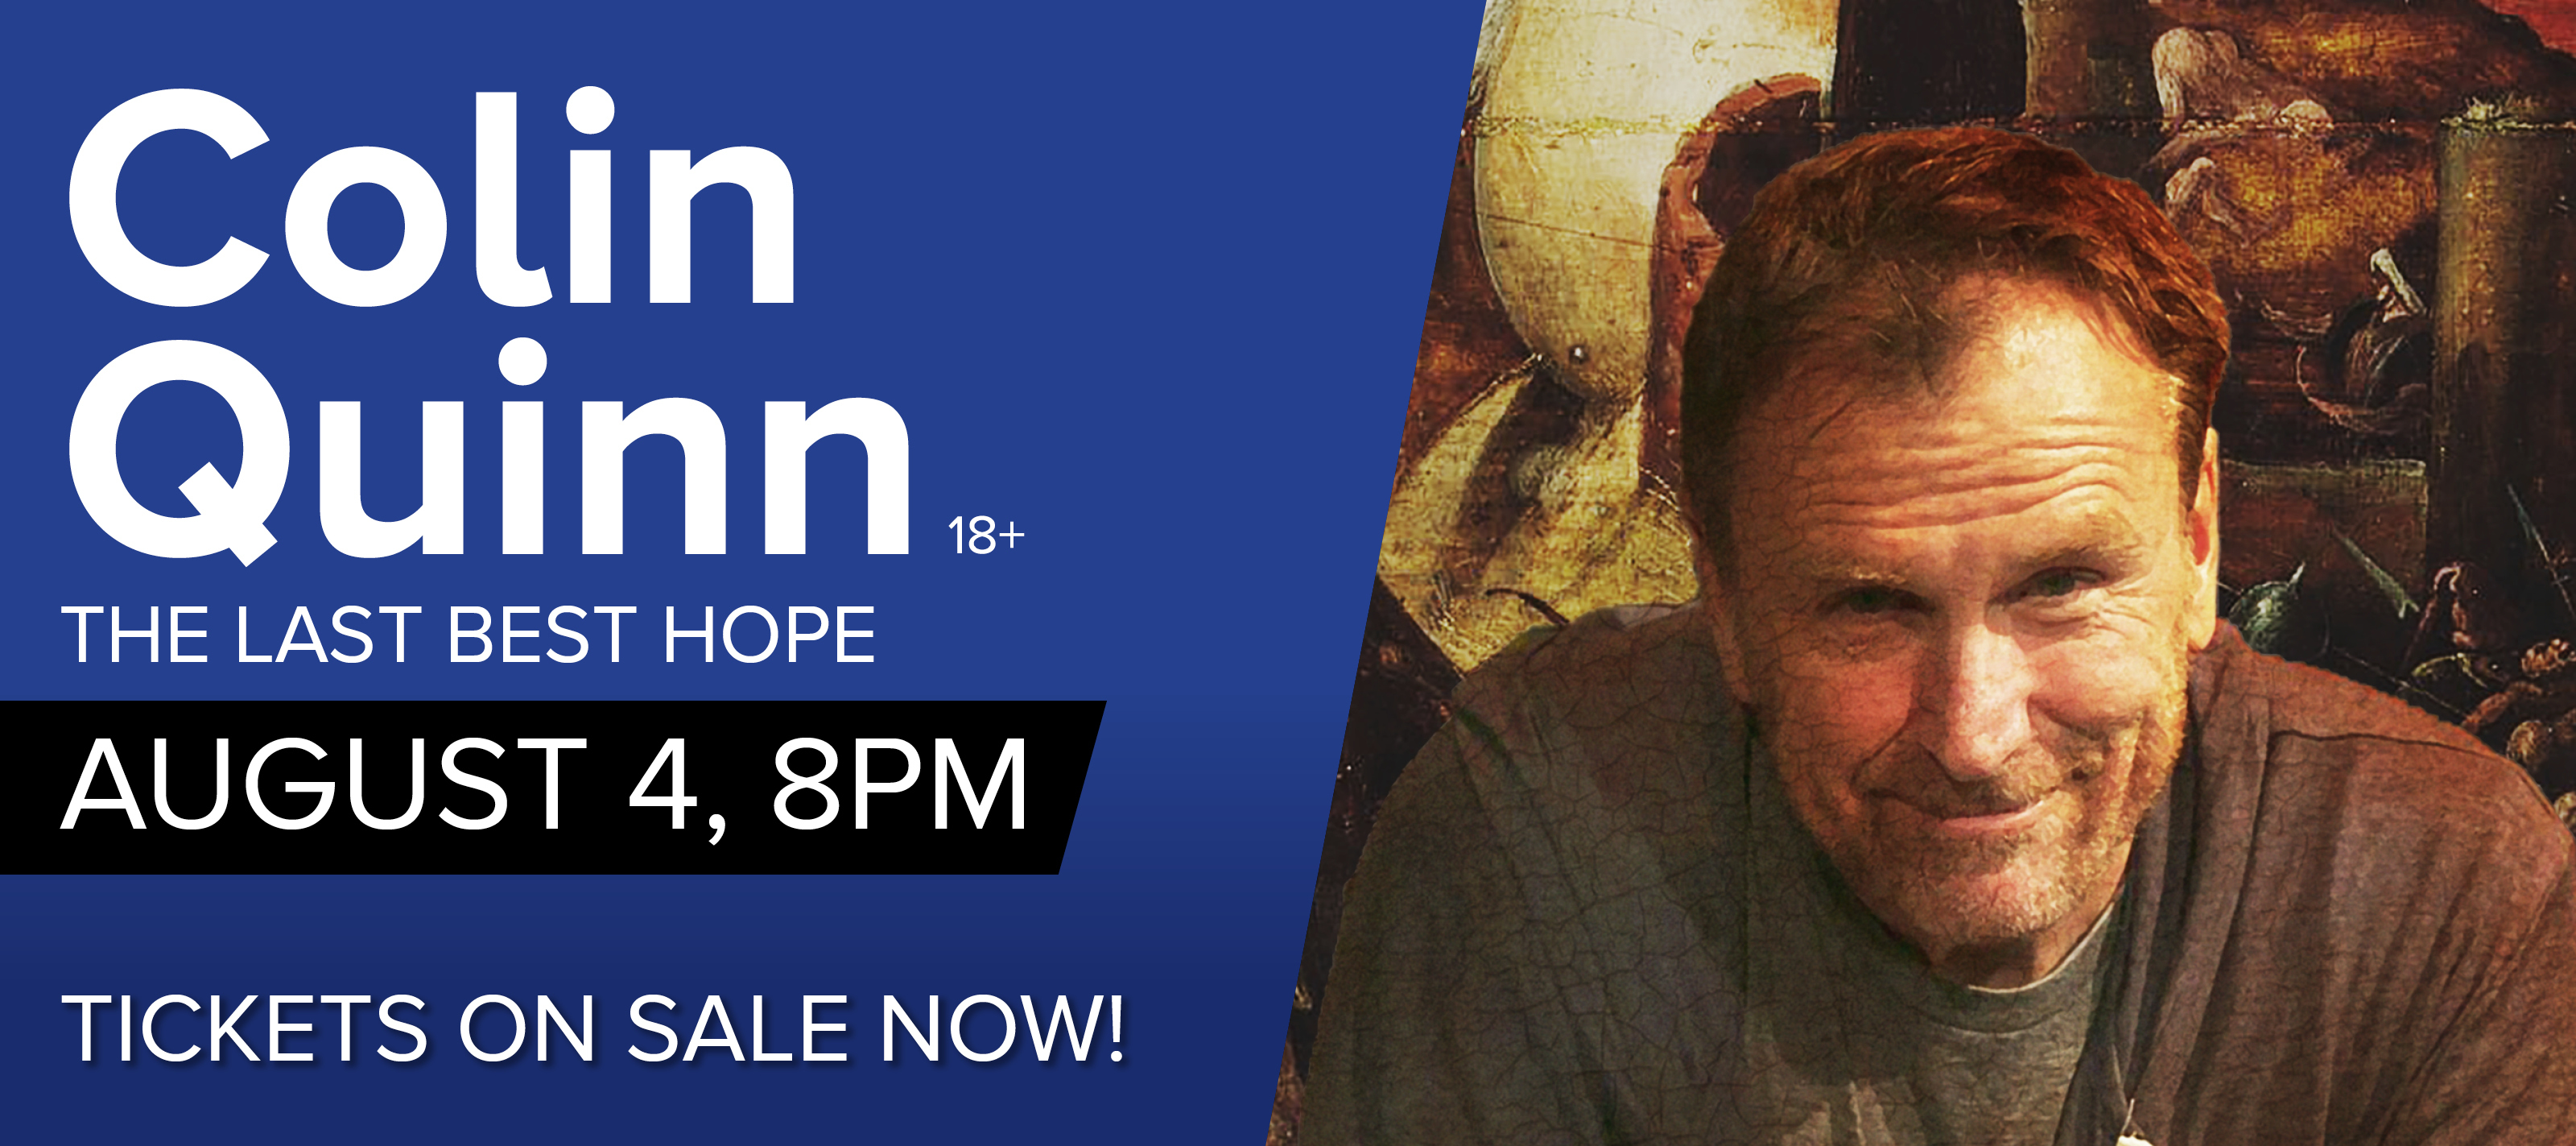 Colin Quinn The Last Best Hope 18+ August 4 8pm Tickets On Sale Now